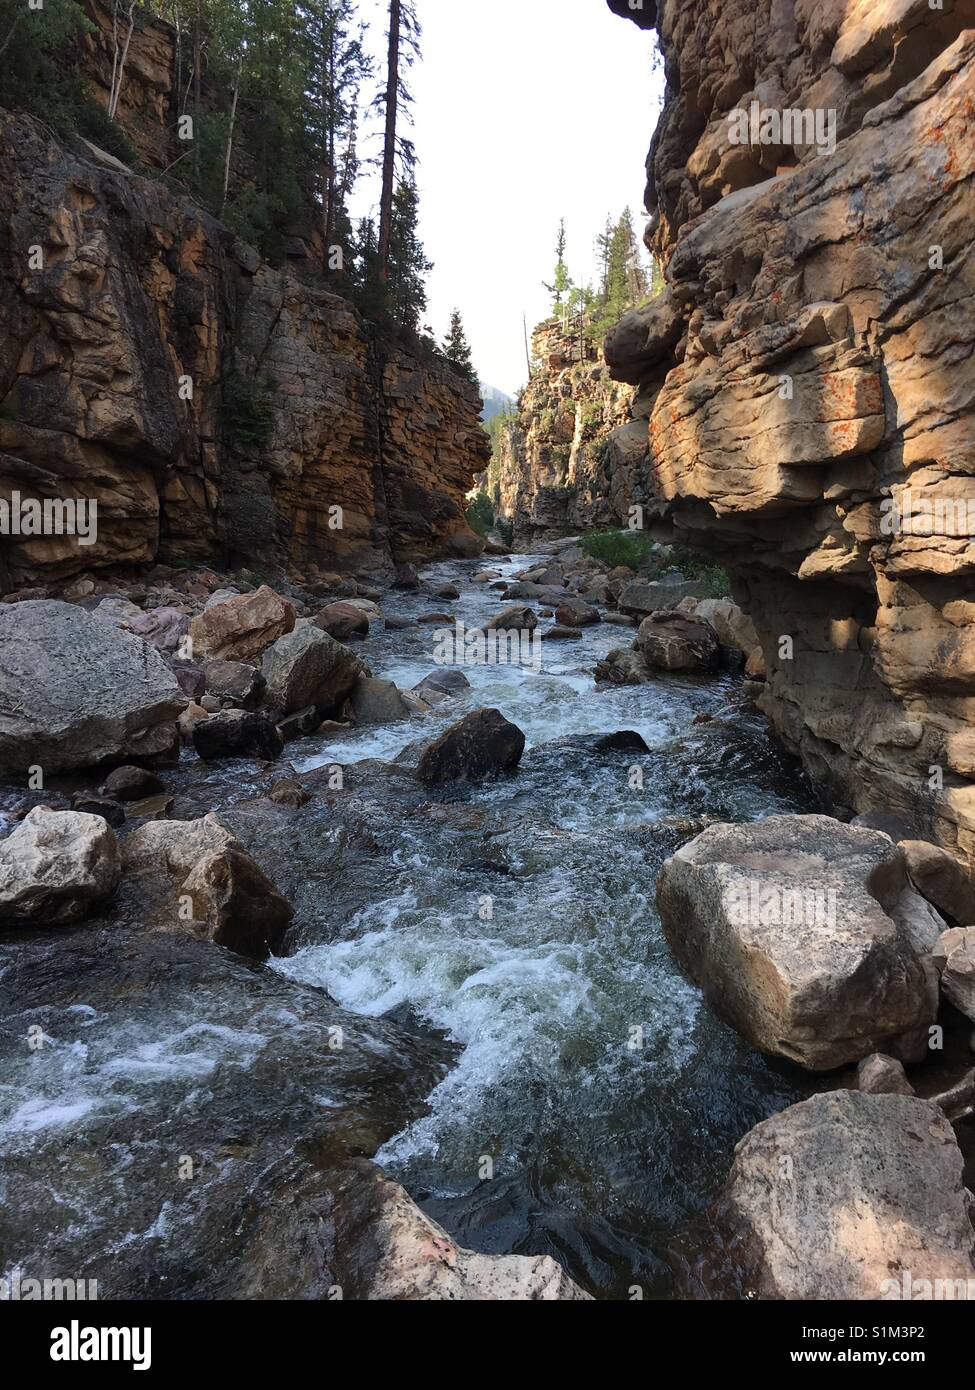 A river flows through a gorge in the Uinta Mountains of Utah. Stock Photo